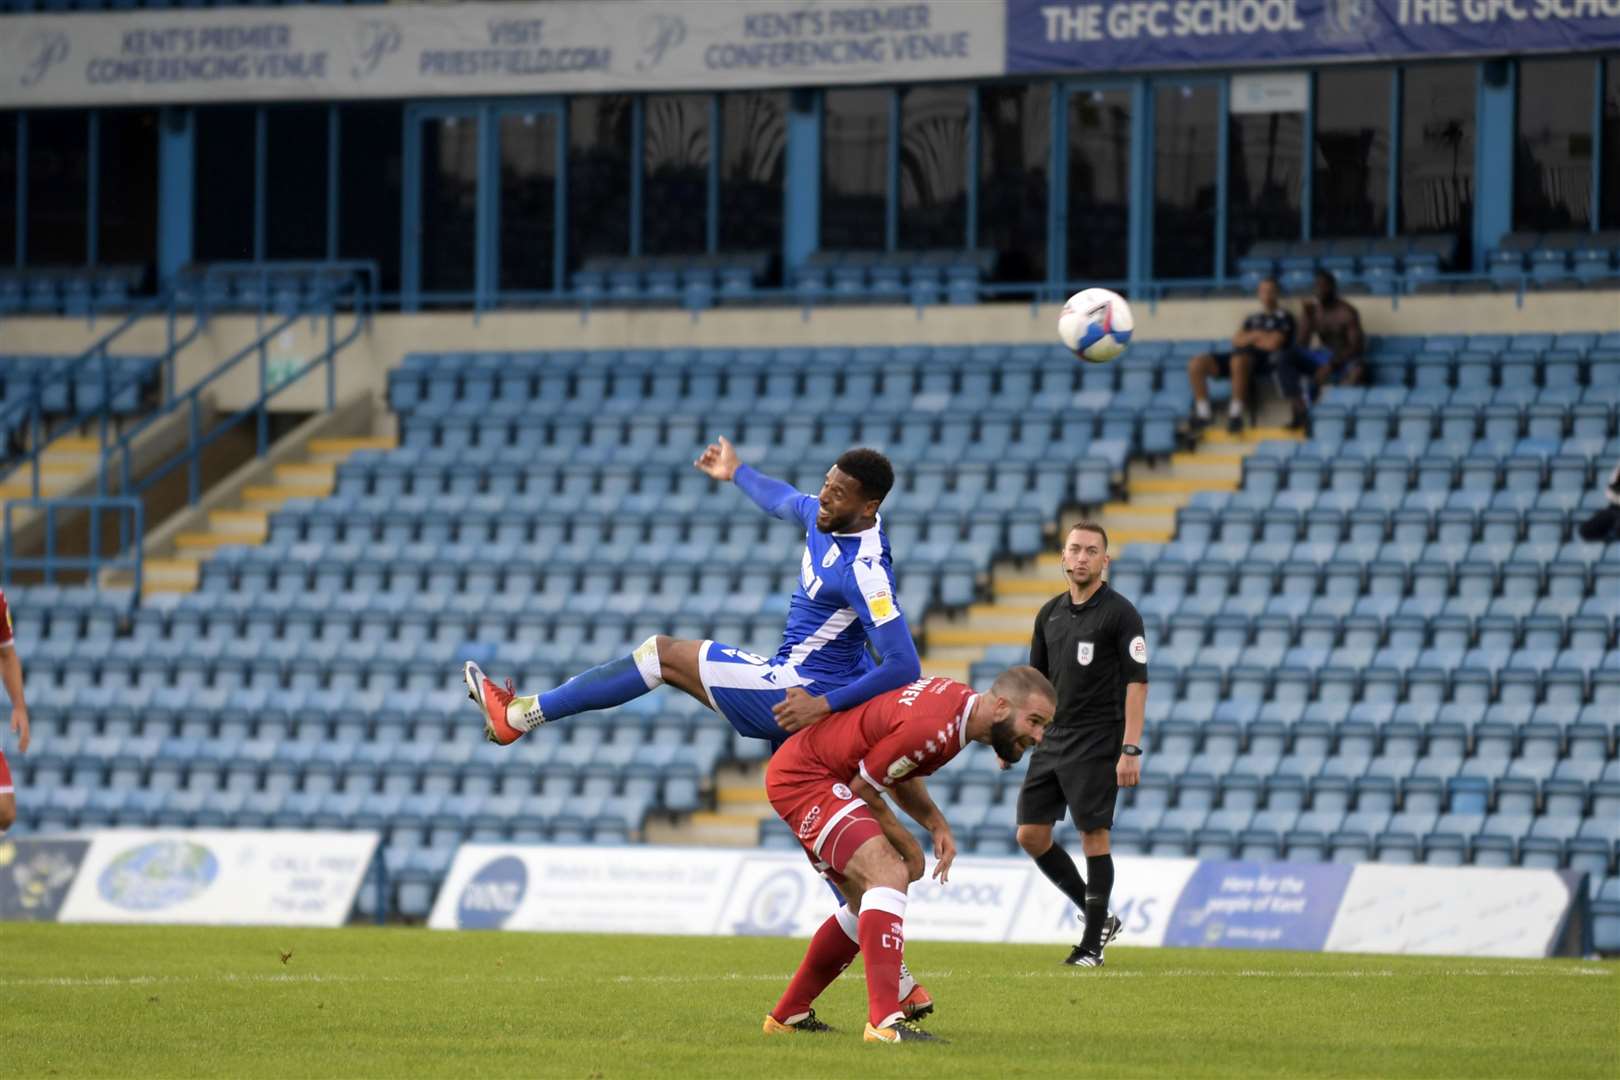 Gillingham up against Crawley Town without a crowd Picture: Barry Goodwin